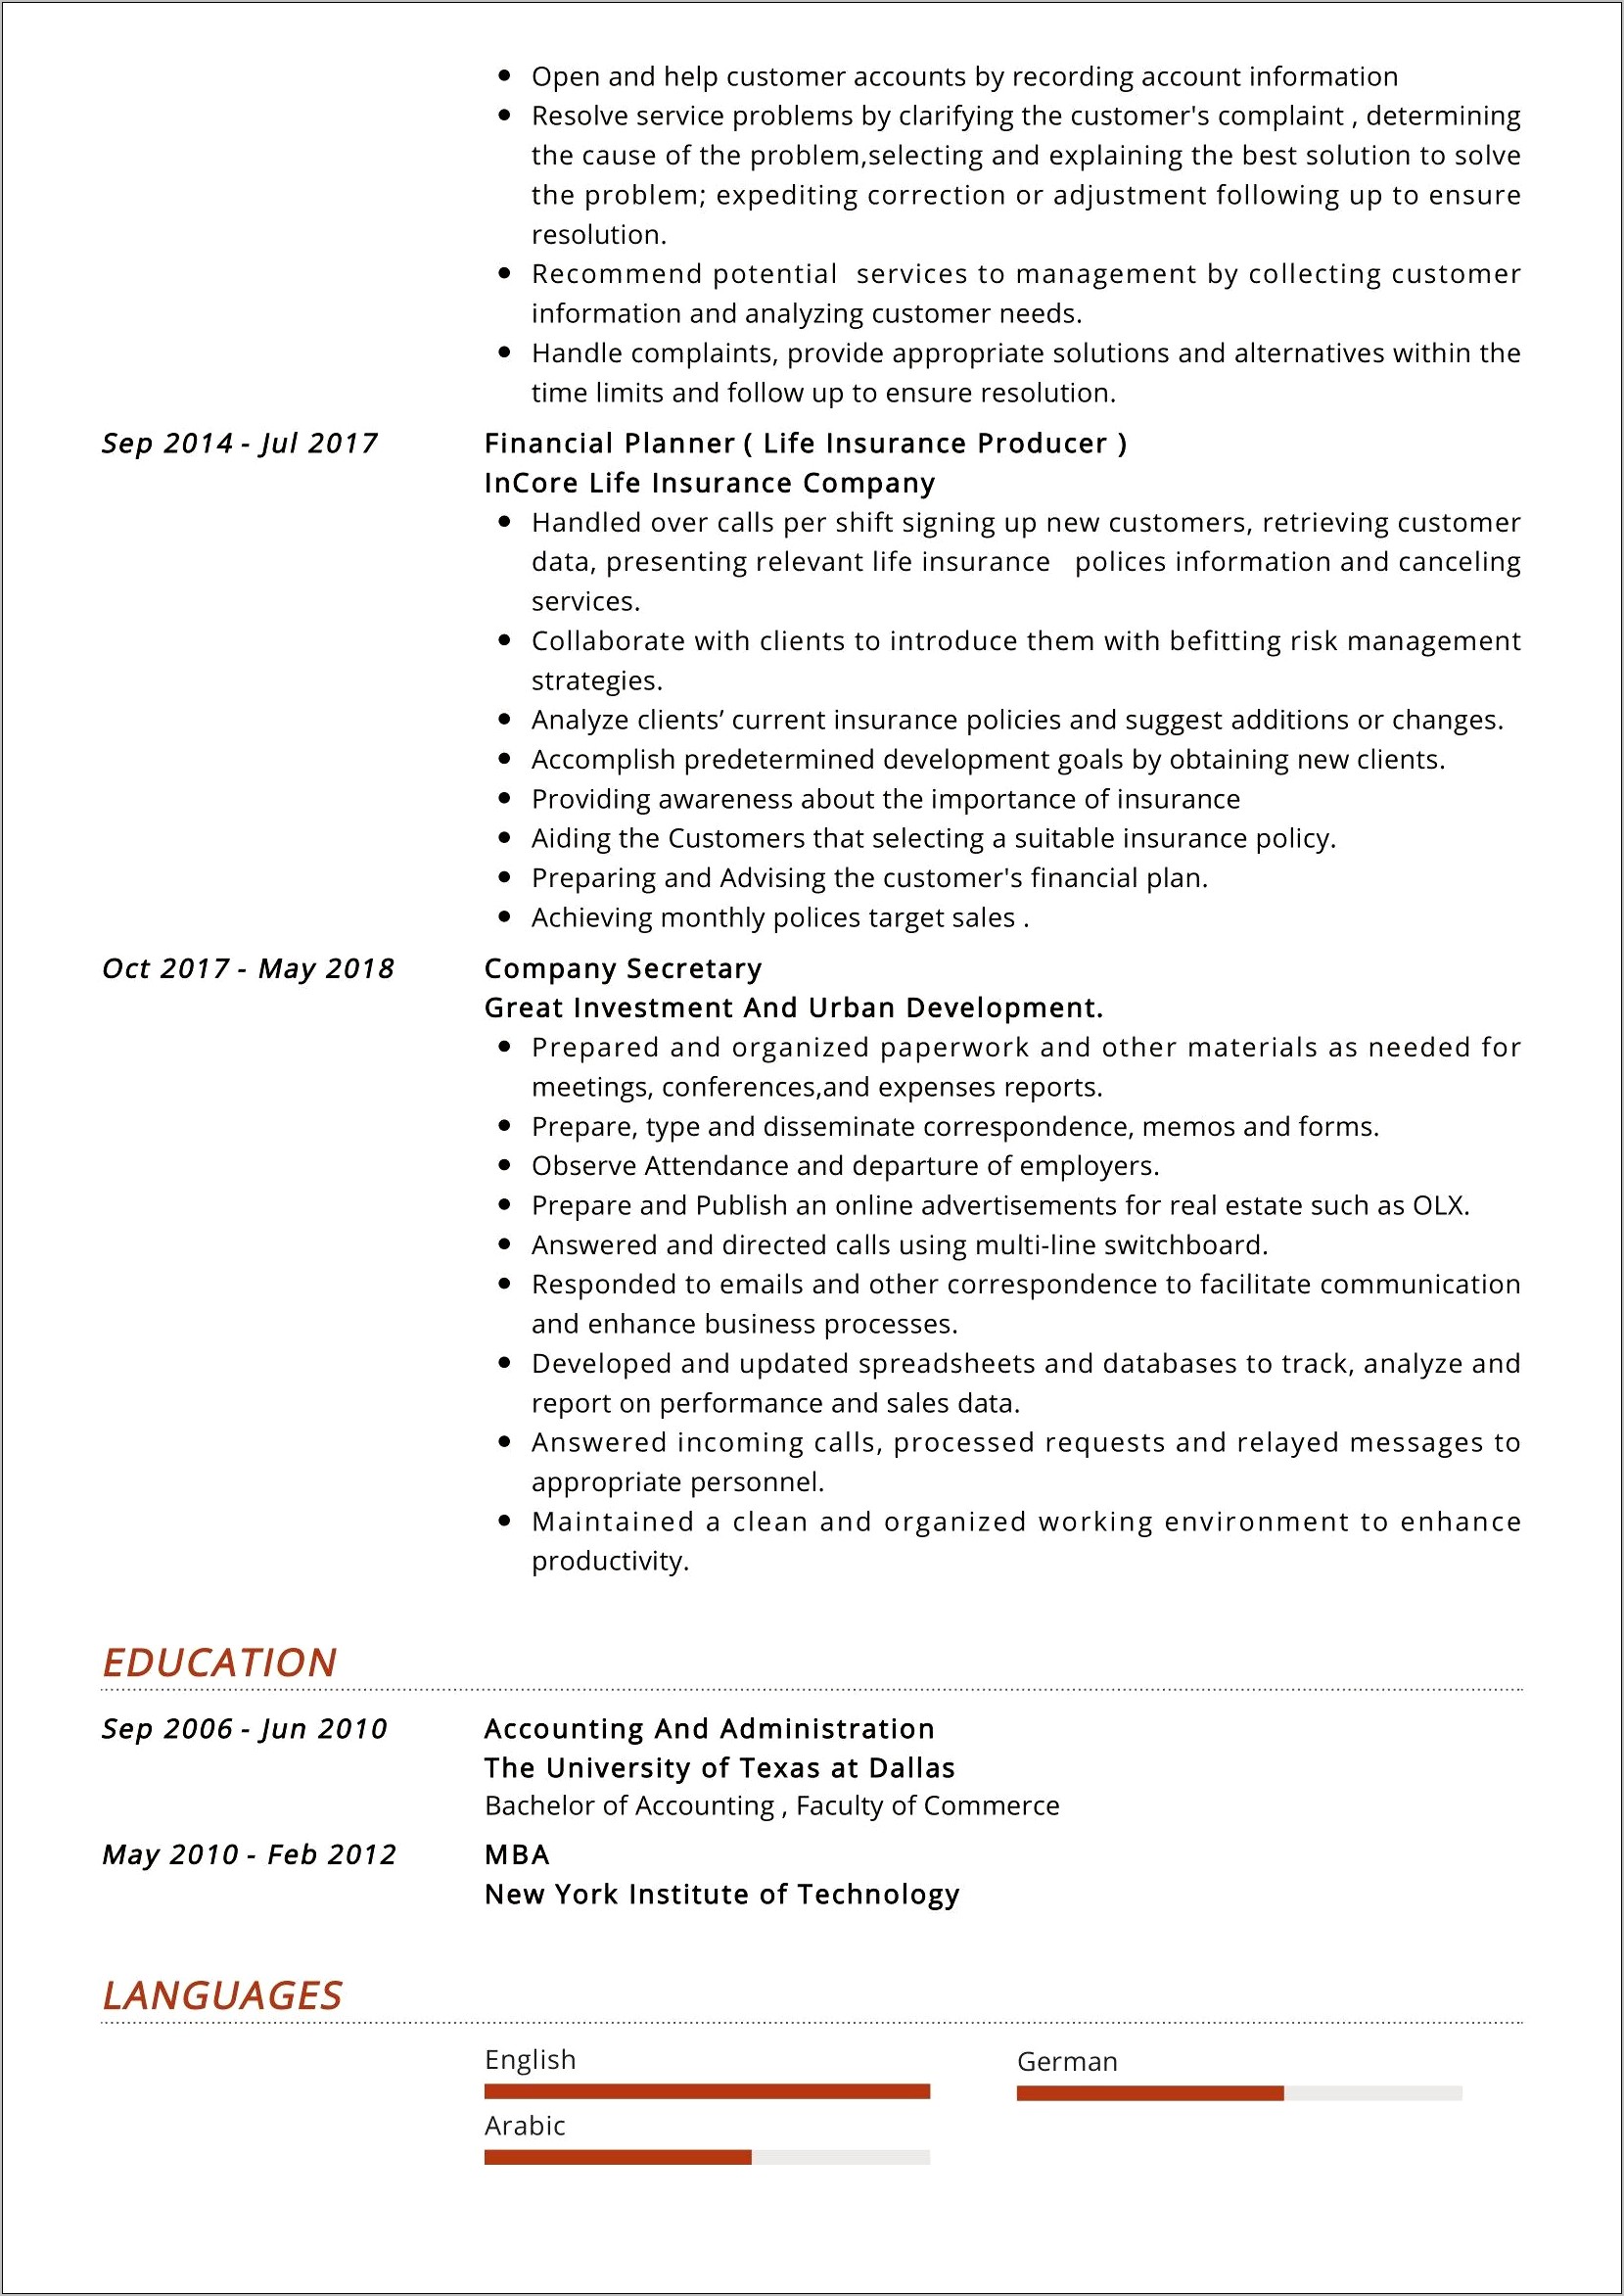 Sample Resume Format For Accountant